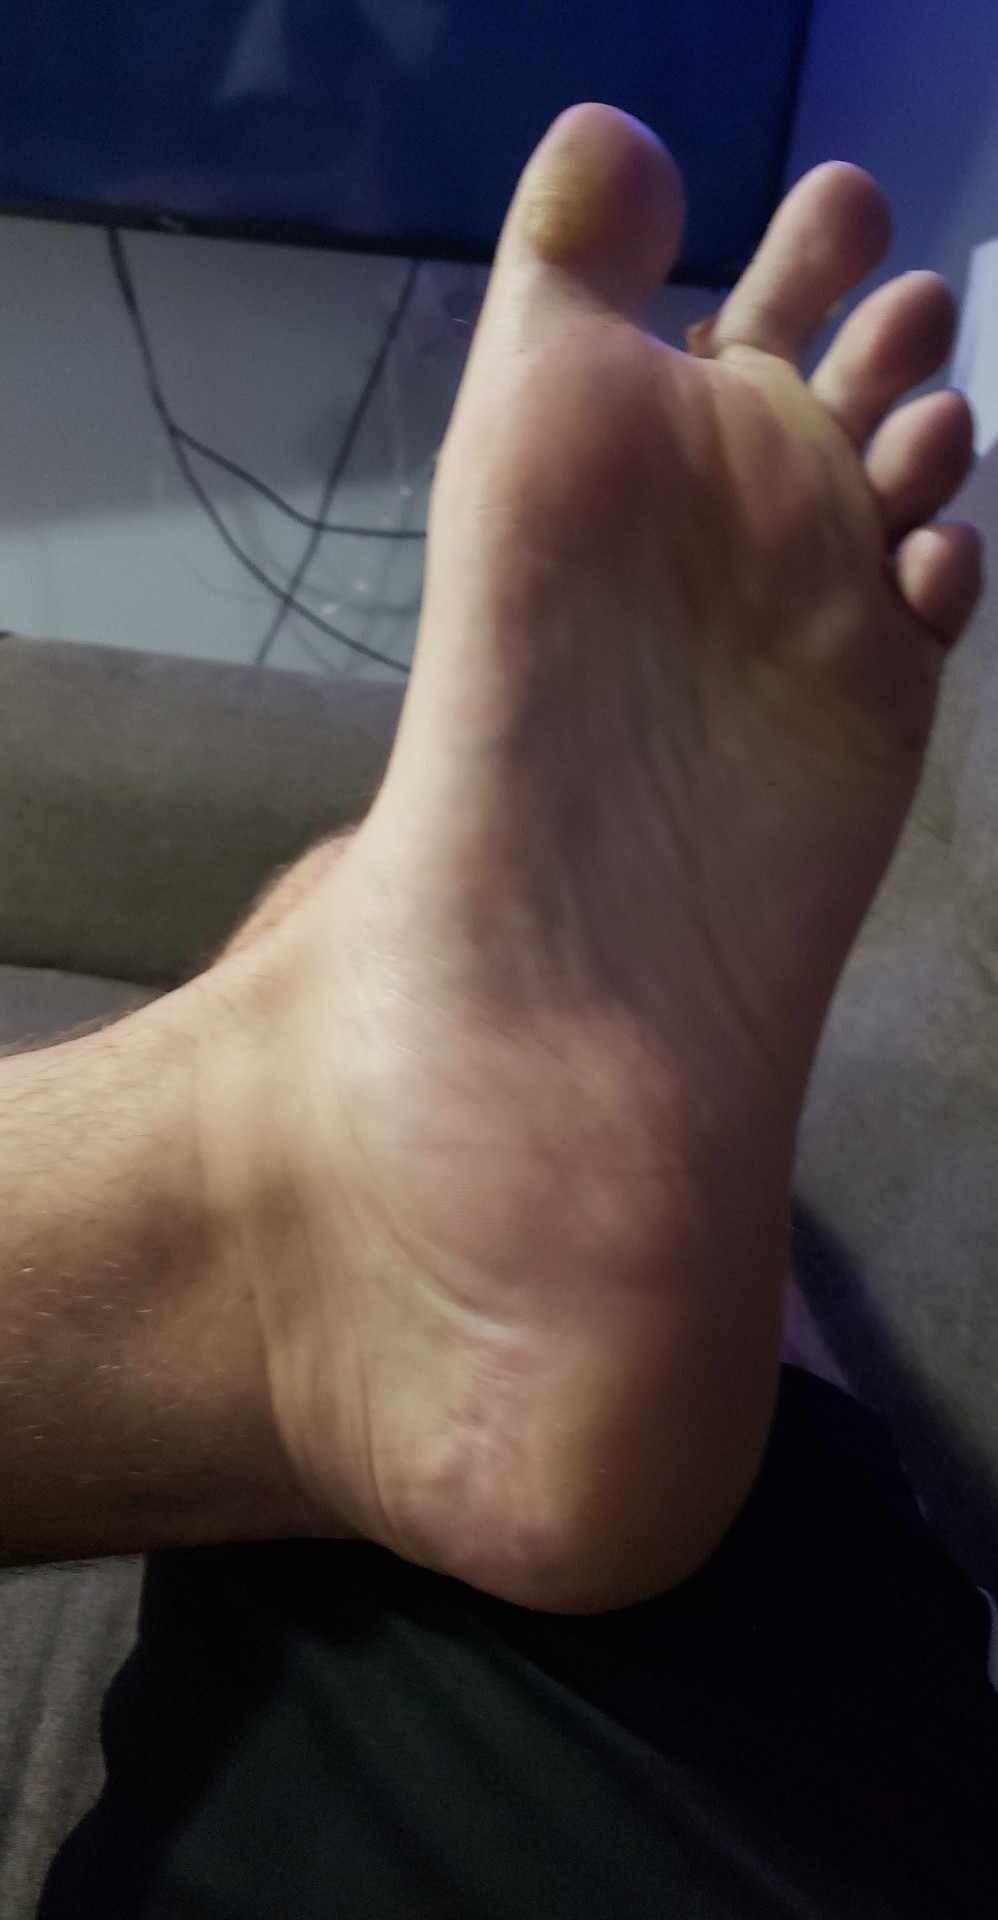 My Feet Pics as Requested.  Opinions?